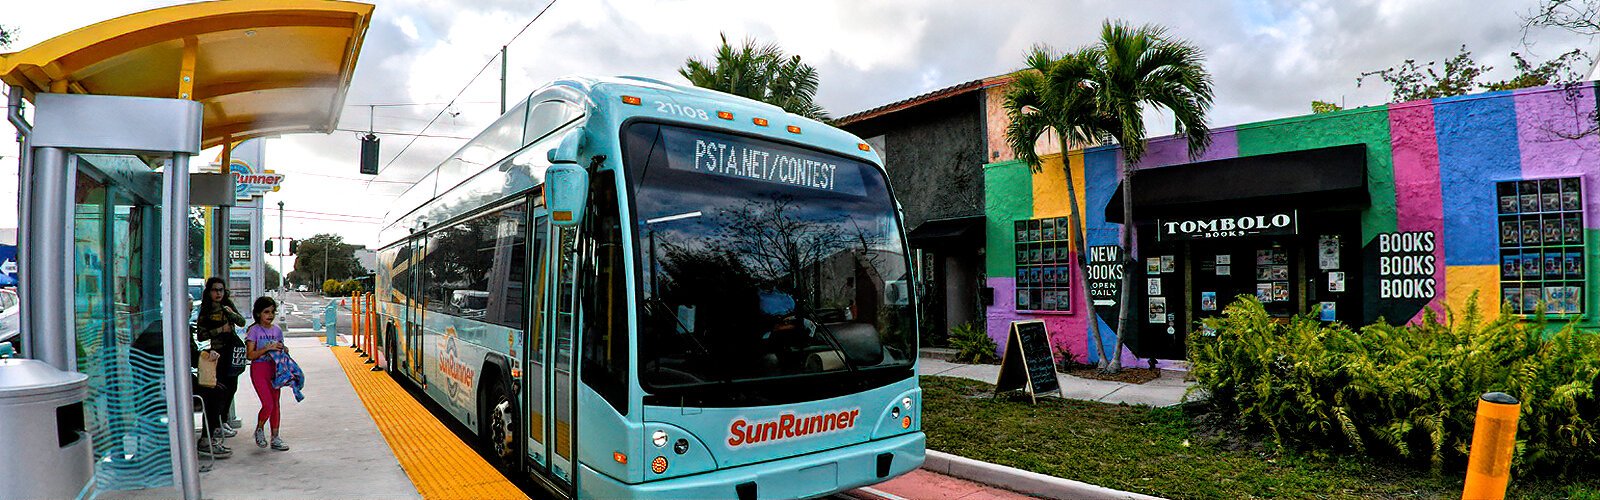 The SunRunner, Pinellas Suncoast Transit Authority’s bus rapid transit service, cruises in its own lane past traffic in the Grand Central District. It is an easy way to get from beach to ‘Burg and anywhere in between, with free rides until  November.